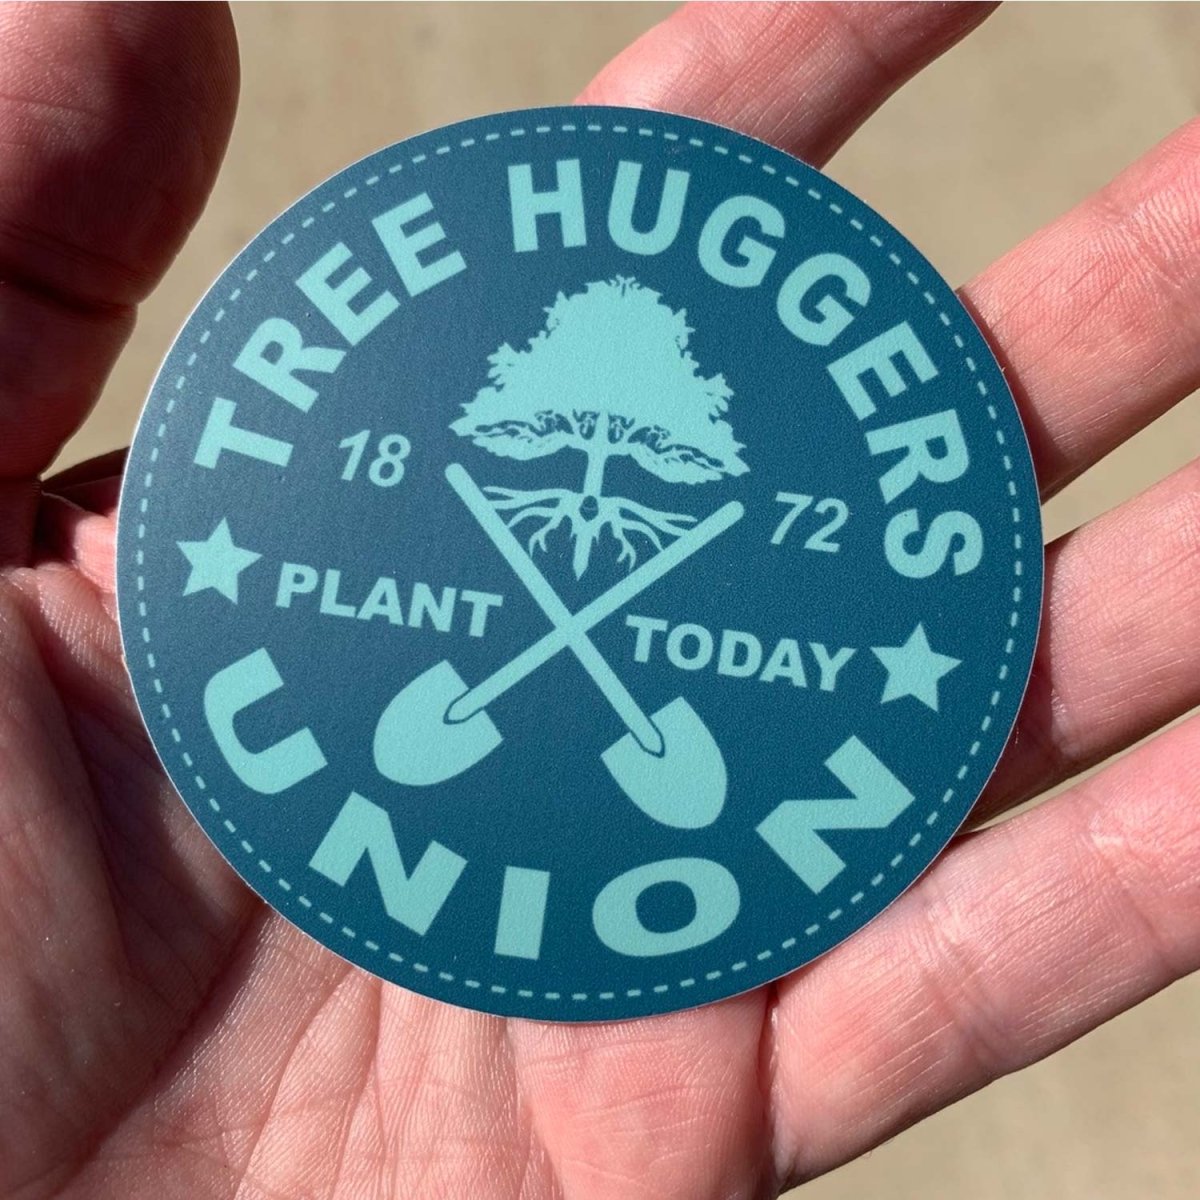 Tree Huggers Union Premium Stickers, Environment Gift, Nature, Outdoors, Climate